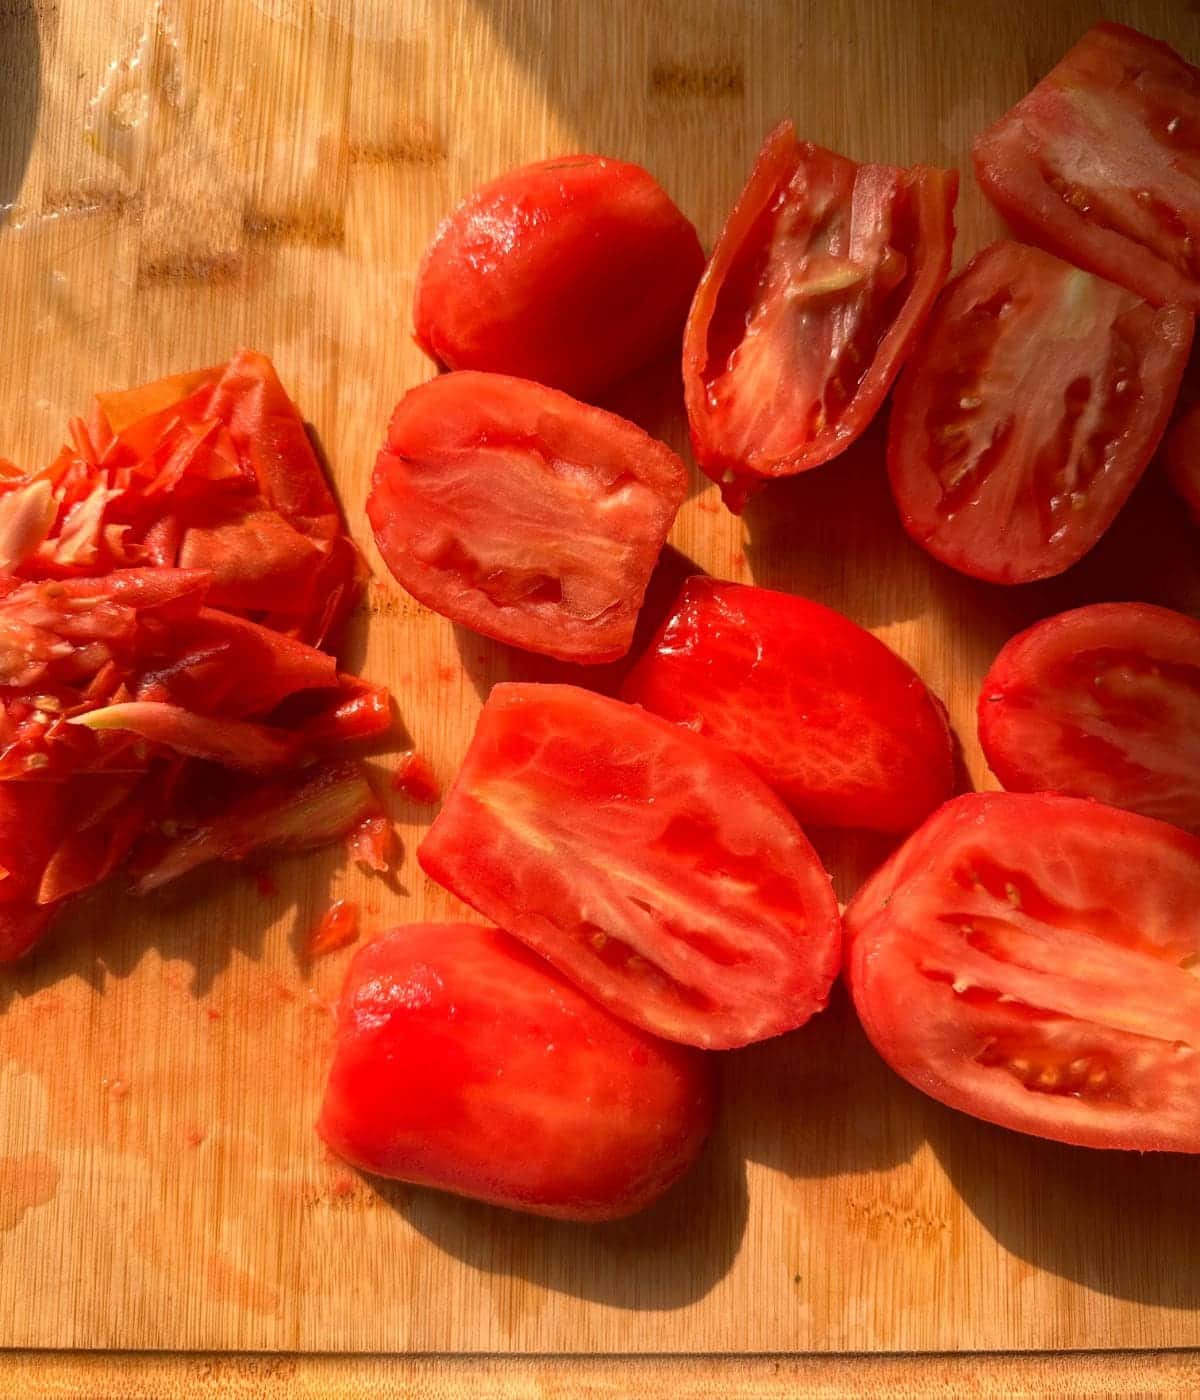 peeled skins of tomatoes piled on the side, and peeled tomatoes kept cut open in halves